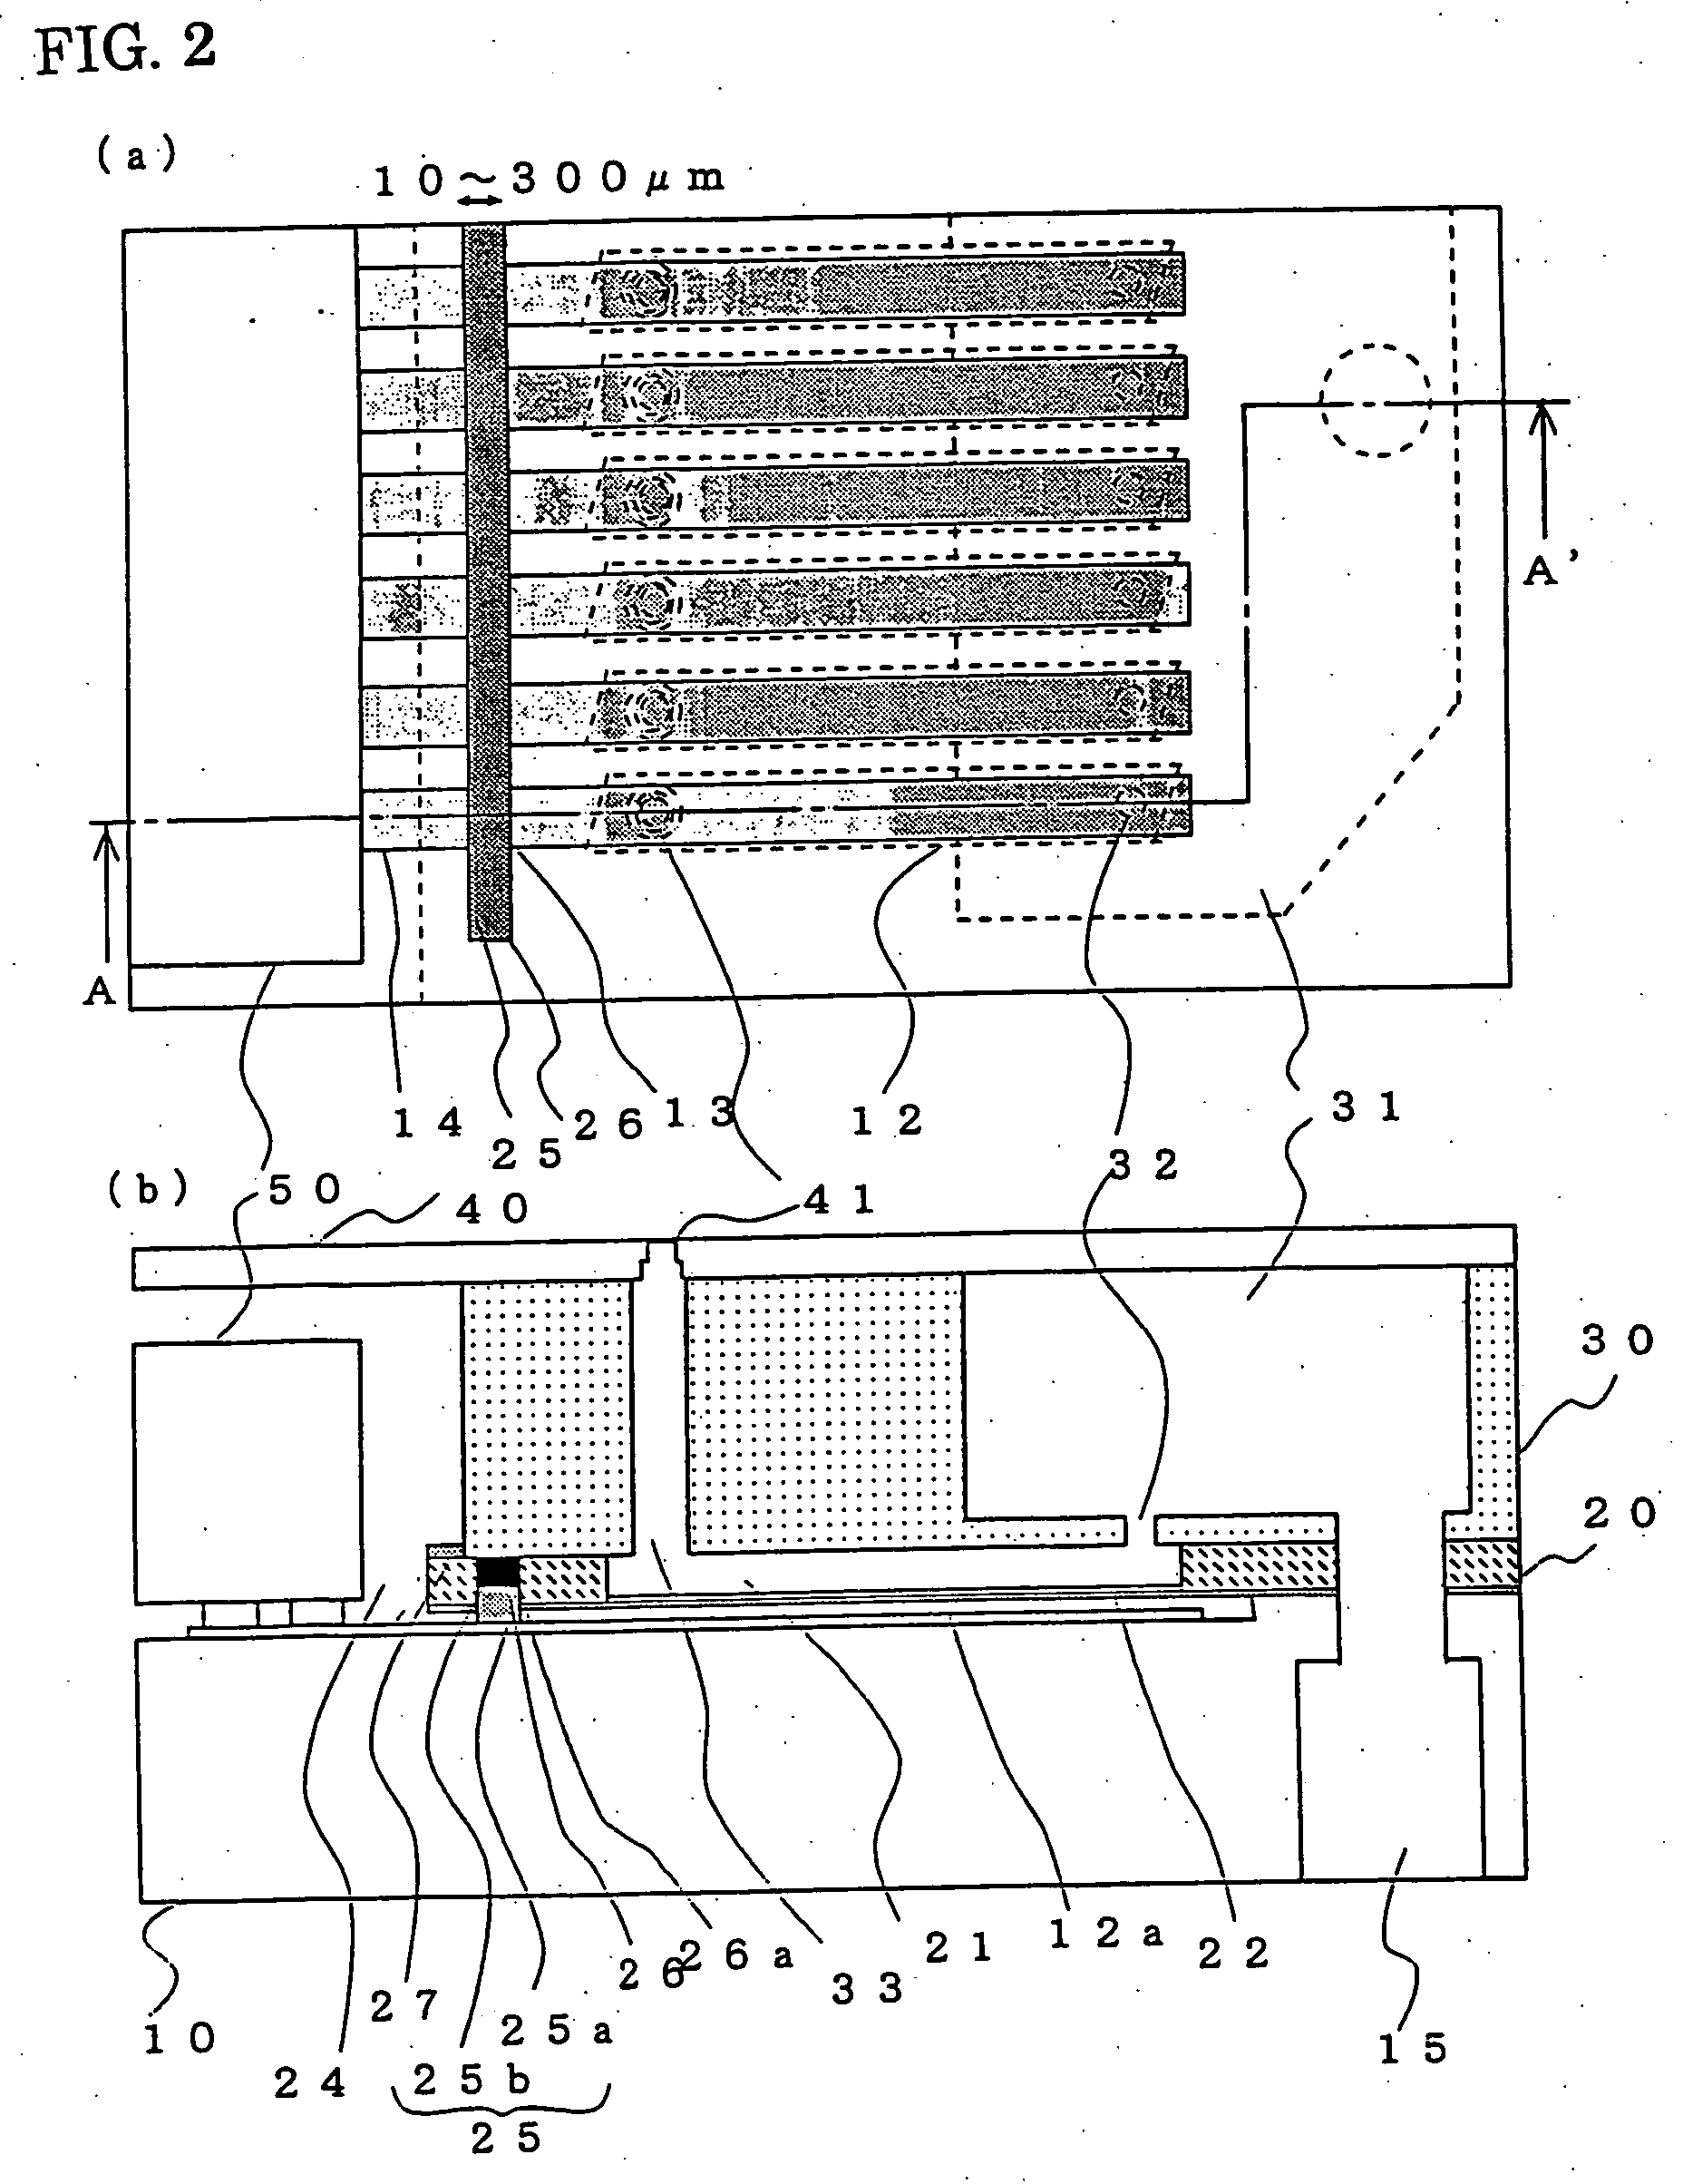 Electrostatic actuator, droplet discharging head, droplet discharging apparatus, electrostatic device, and method of manufacturing these